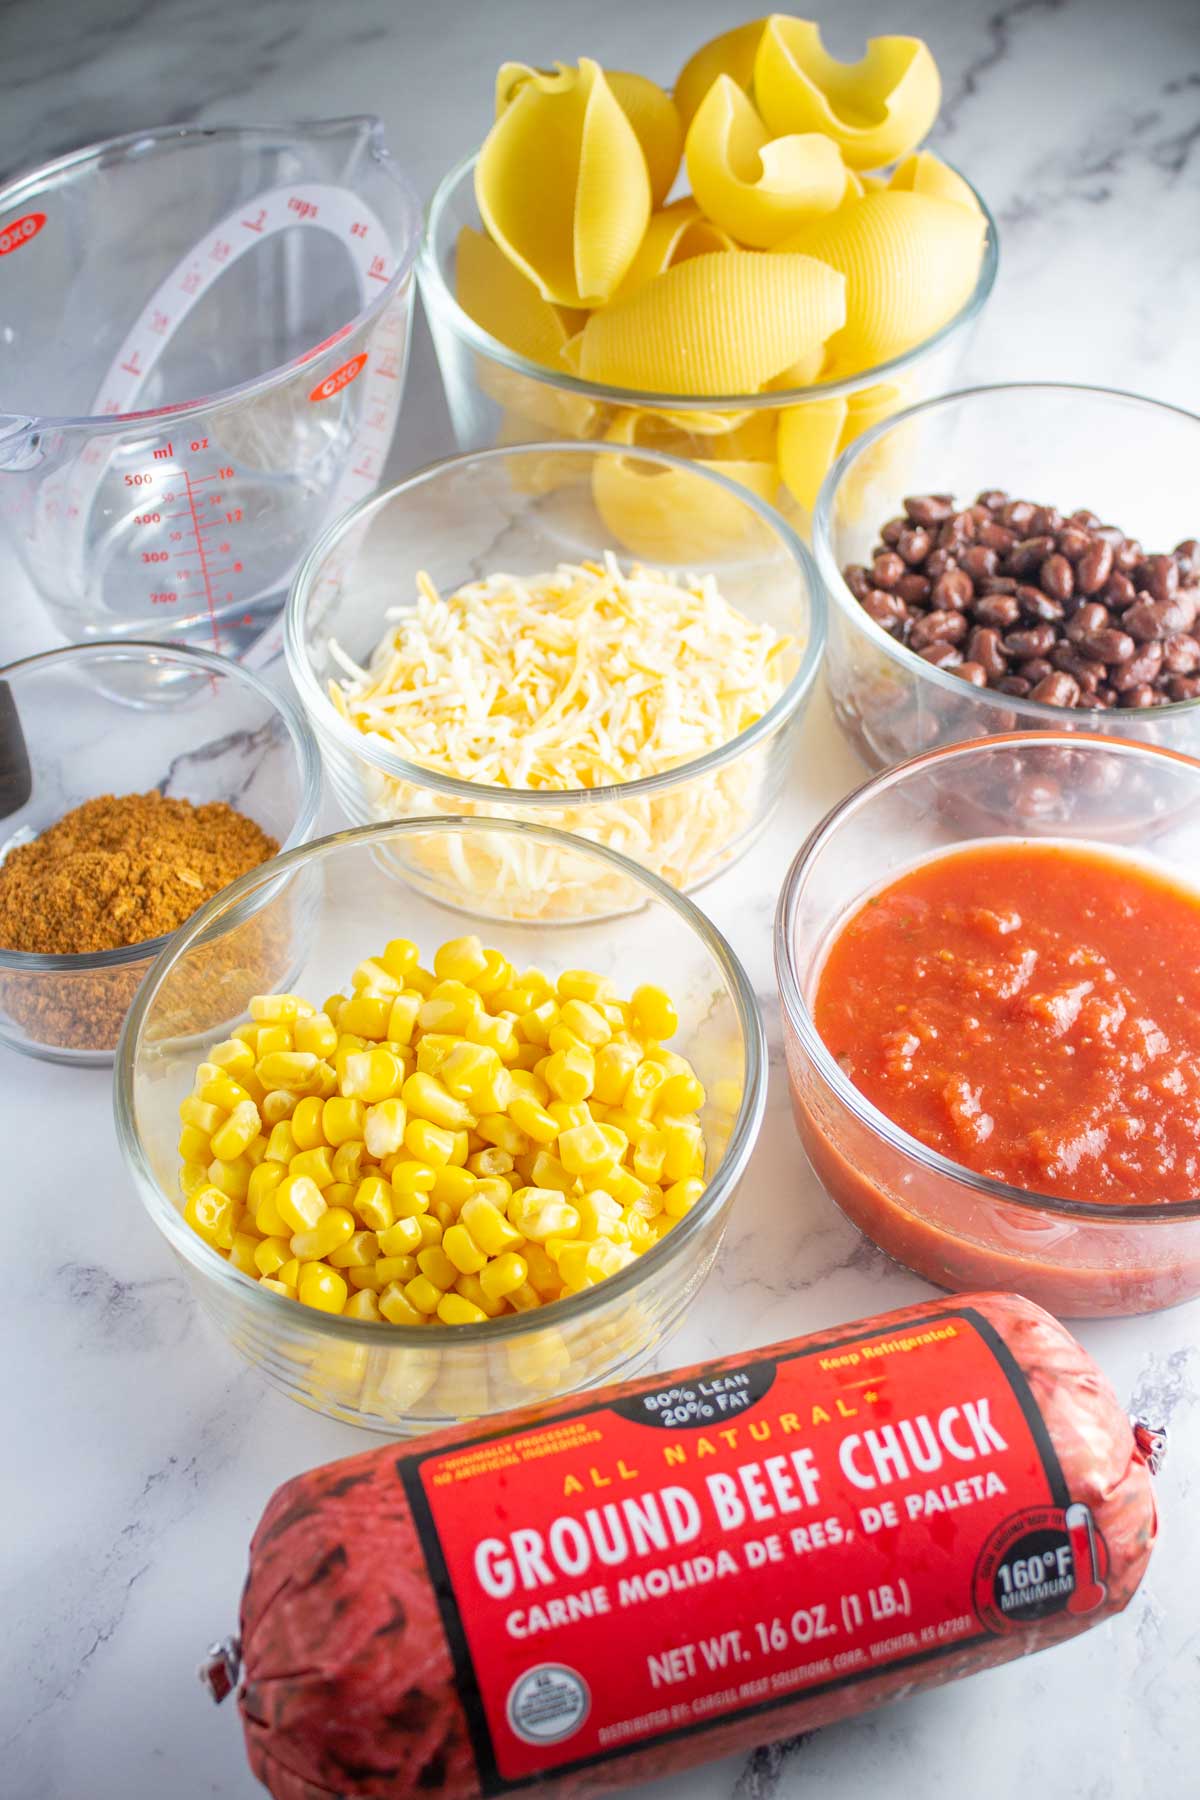 Tall image showing taco stuffed shell ingredients.